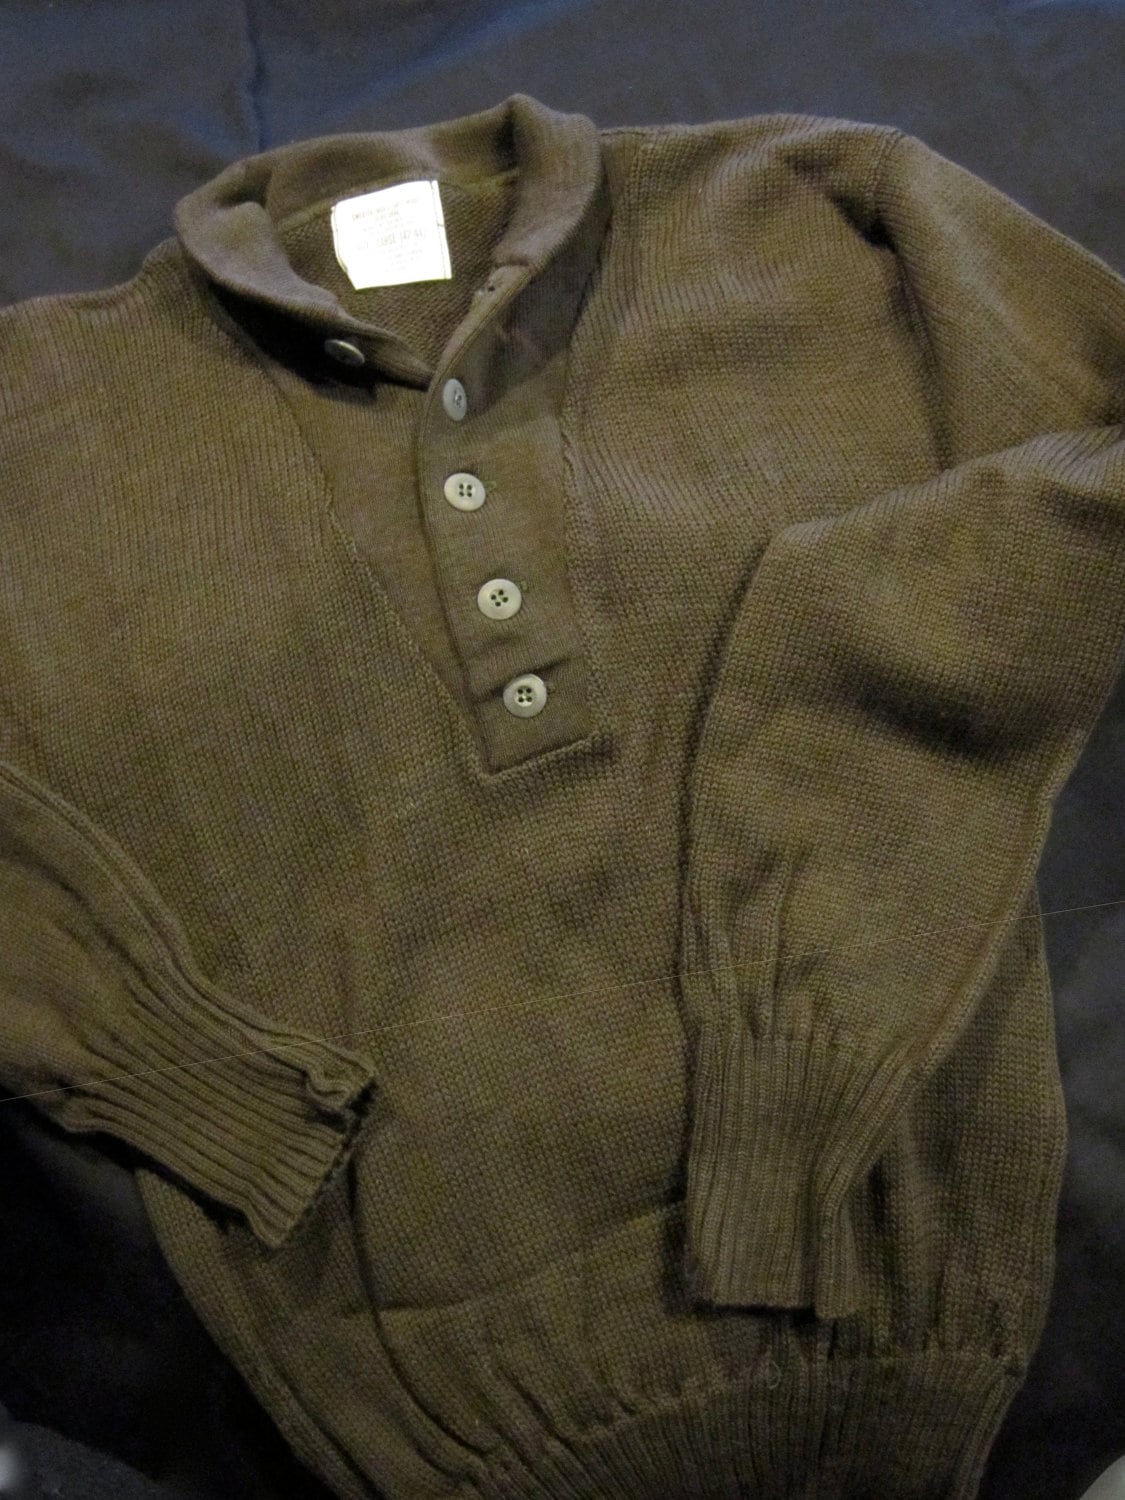 My girlfreind washed my cashmere sweater - Page 4 - AR15.COM